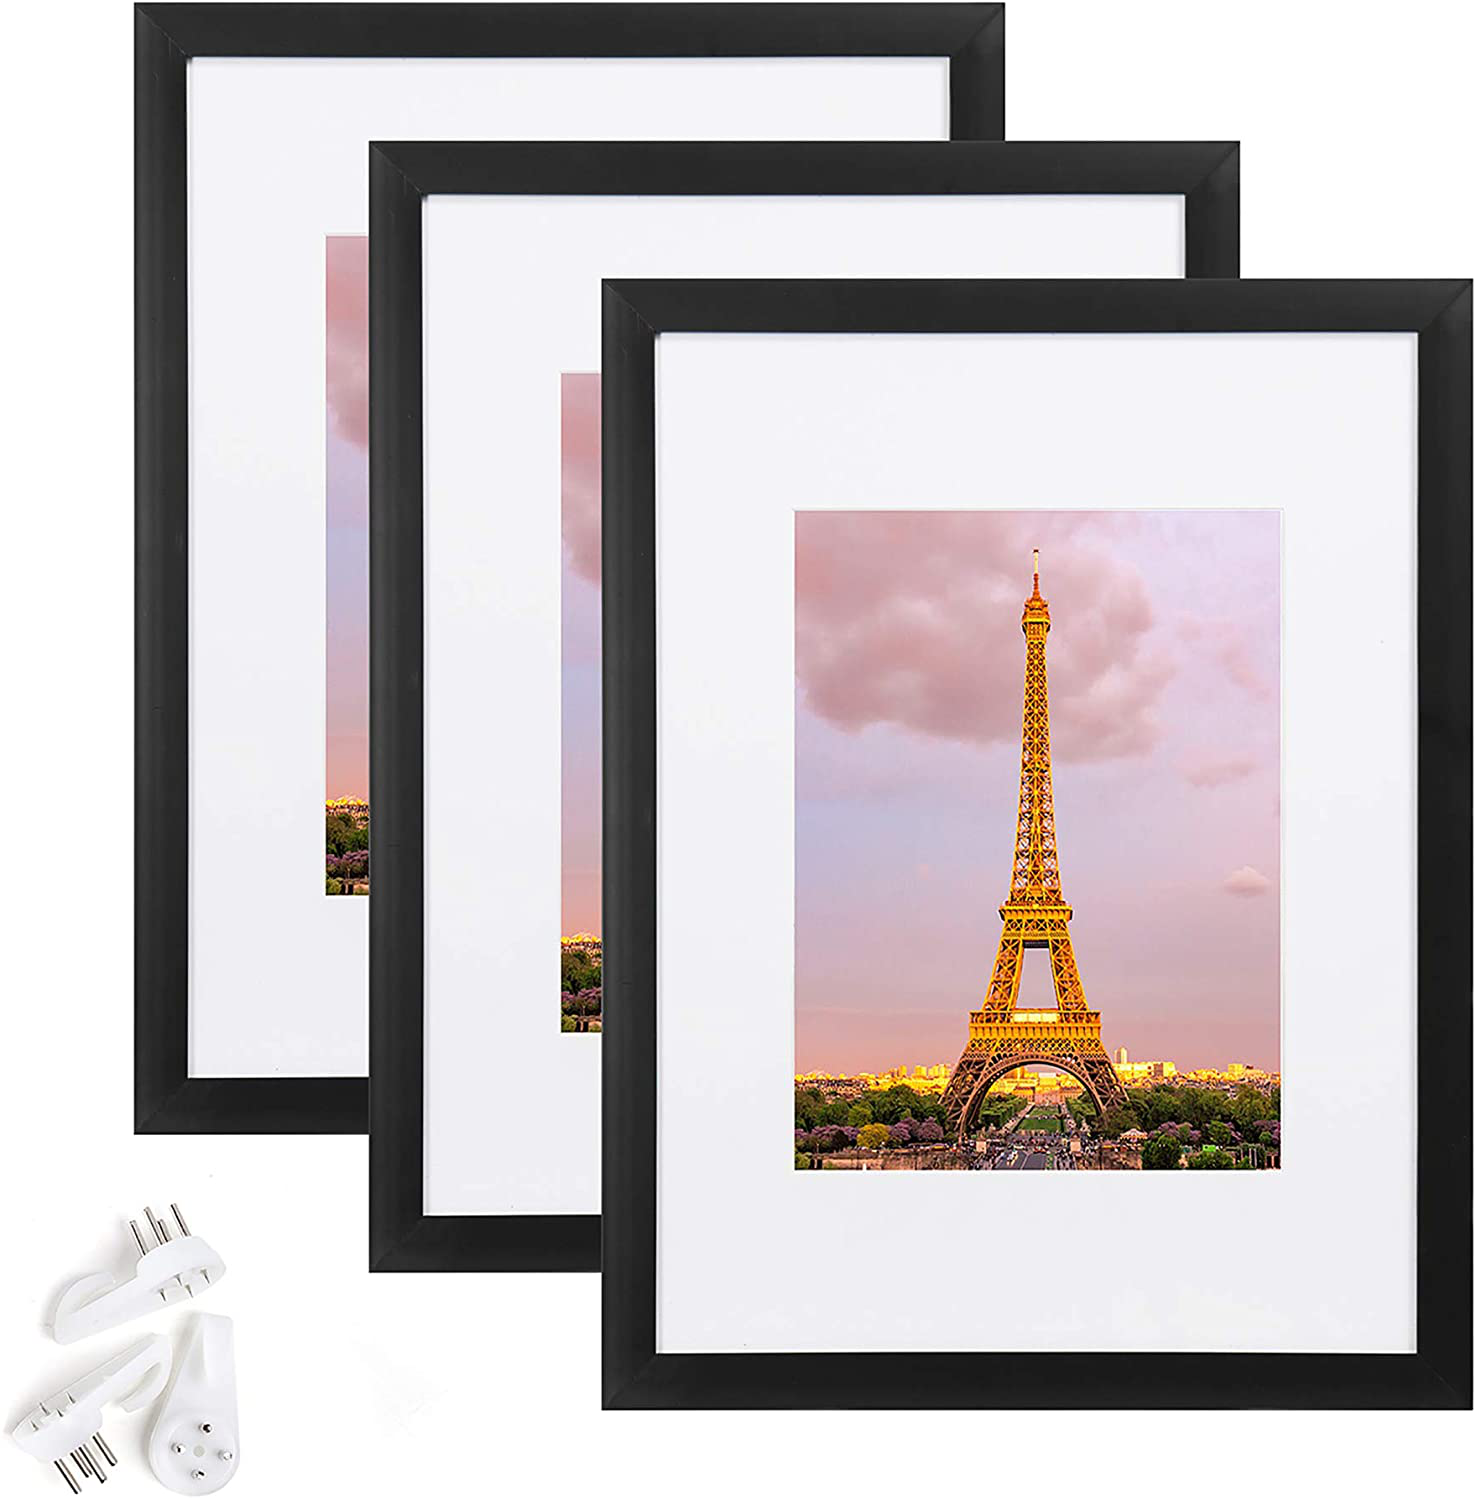 upsimples 9x12 Picture Frame Set of 3,Made of High Definition Glass for 6x8 with Mat or 9x12 Without Mat,Wall Mounting Photo Frame Black